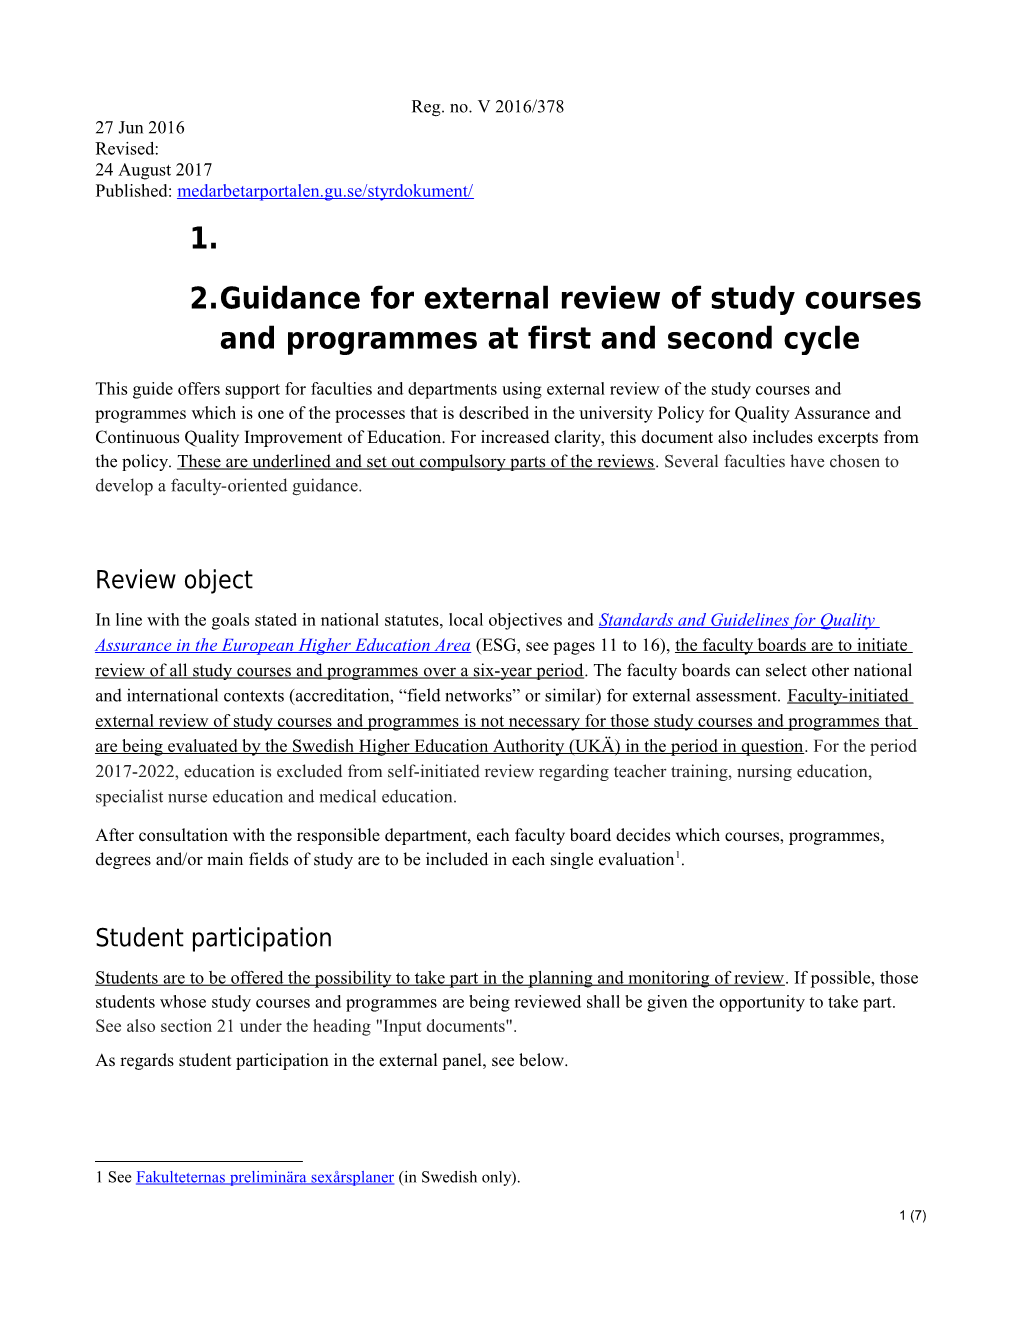 Guidance for External Review of Study Courses and Programmes at First and Second Cycle